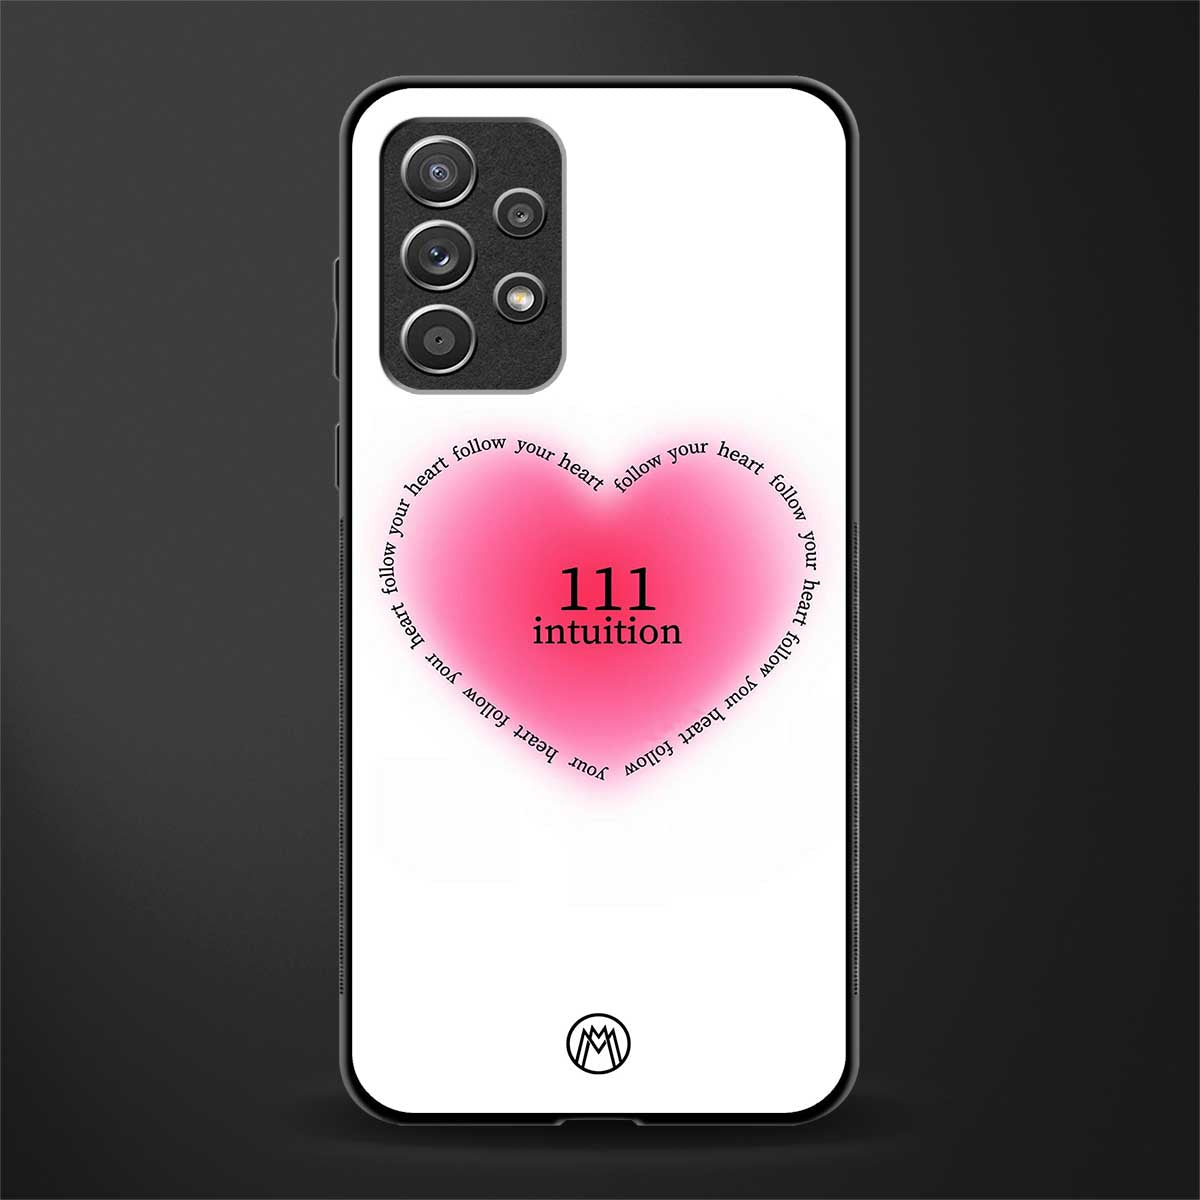 111 intuition glass case for samsung galaxy a72 image